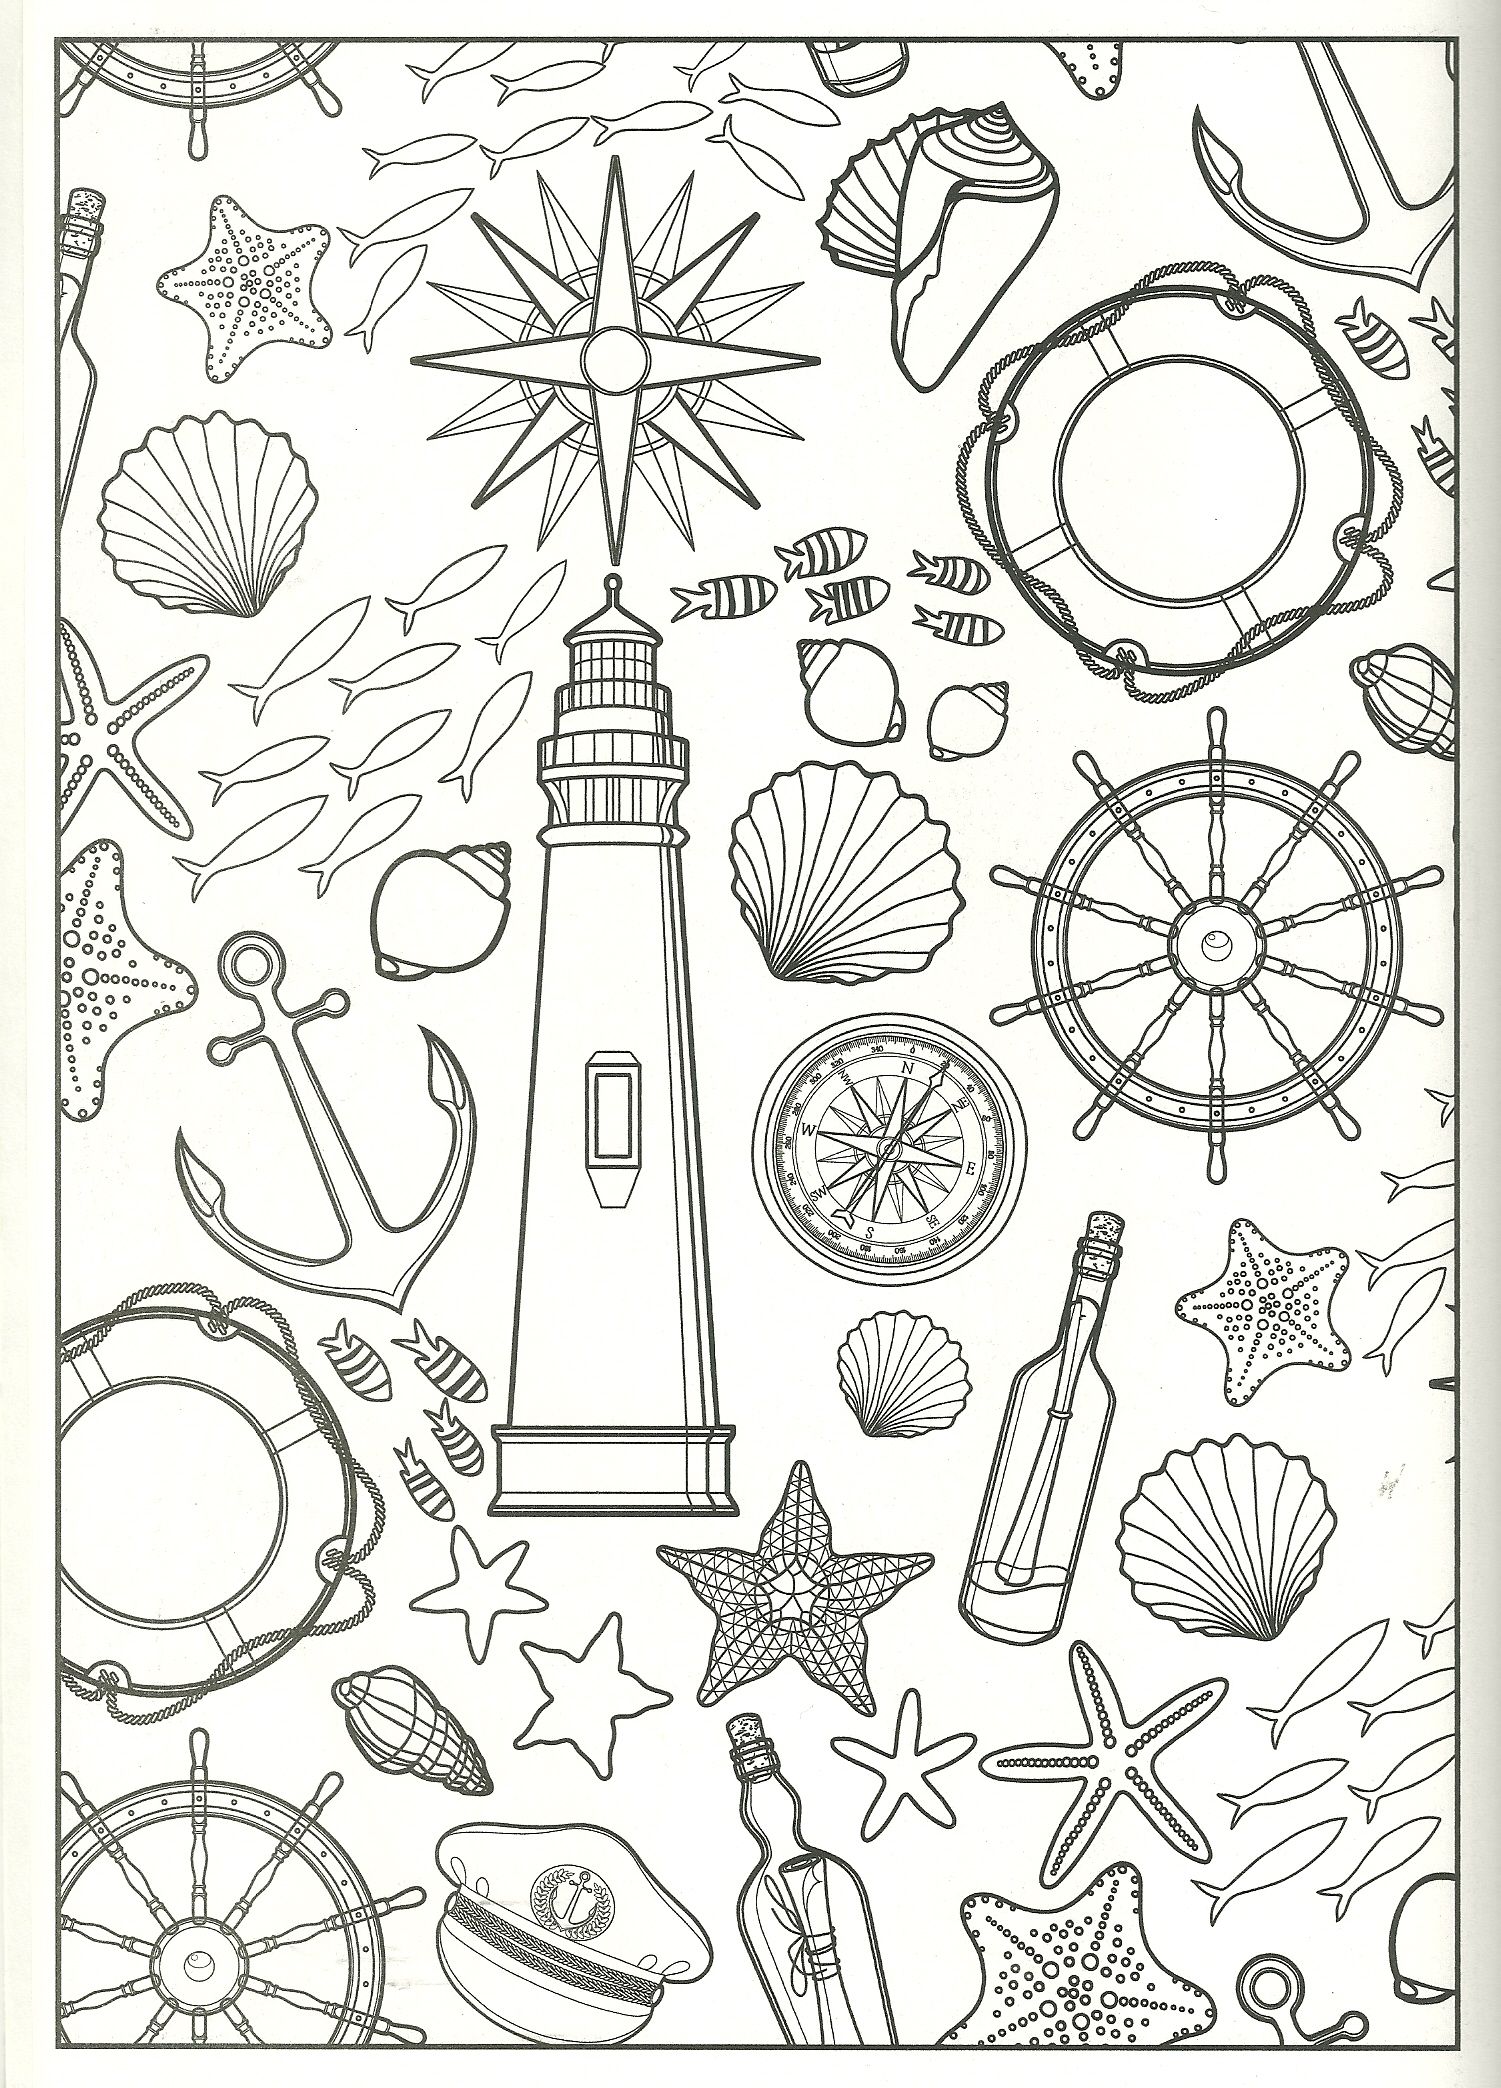 nautical collage coloring page | Coloring pages, Coloring pages ...